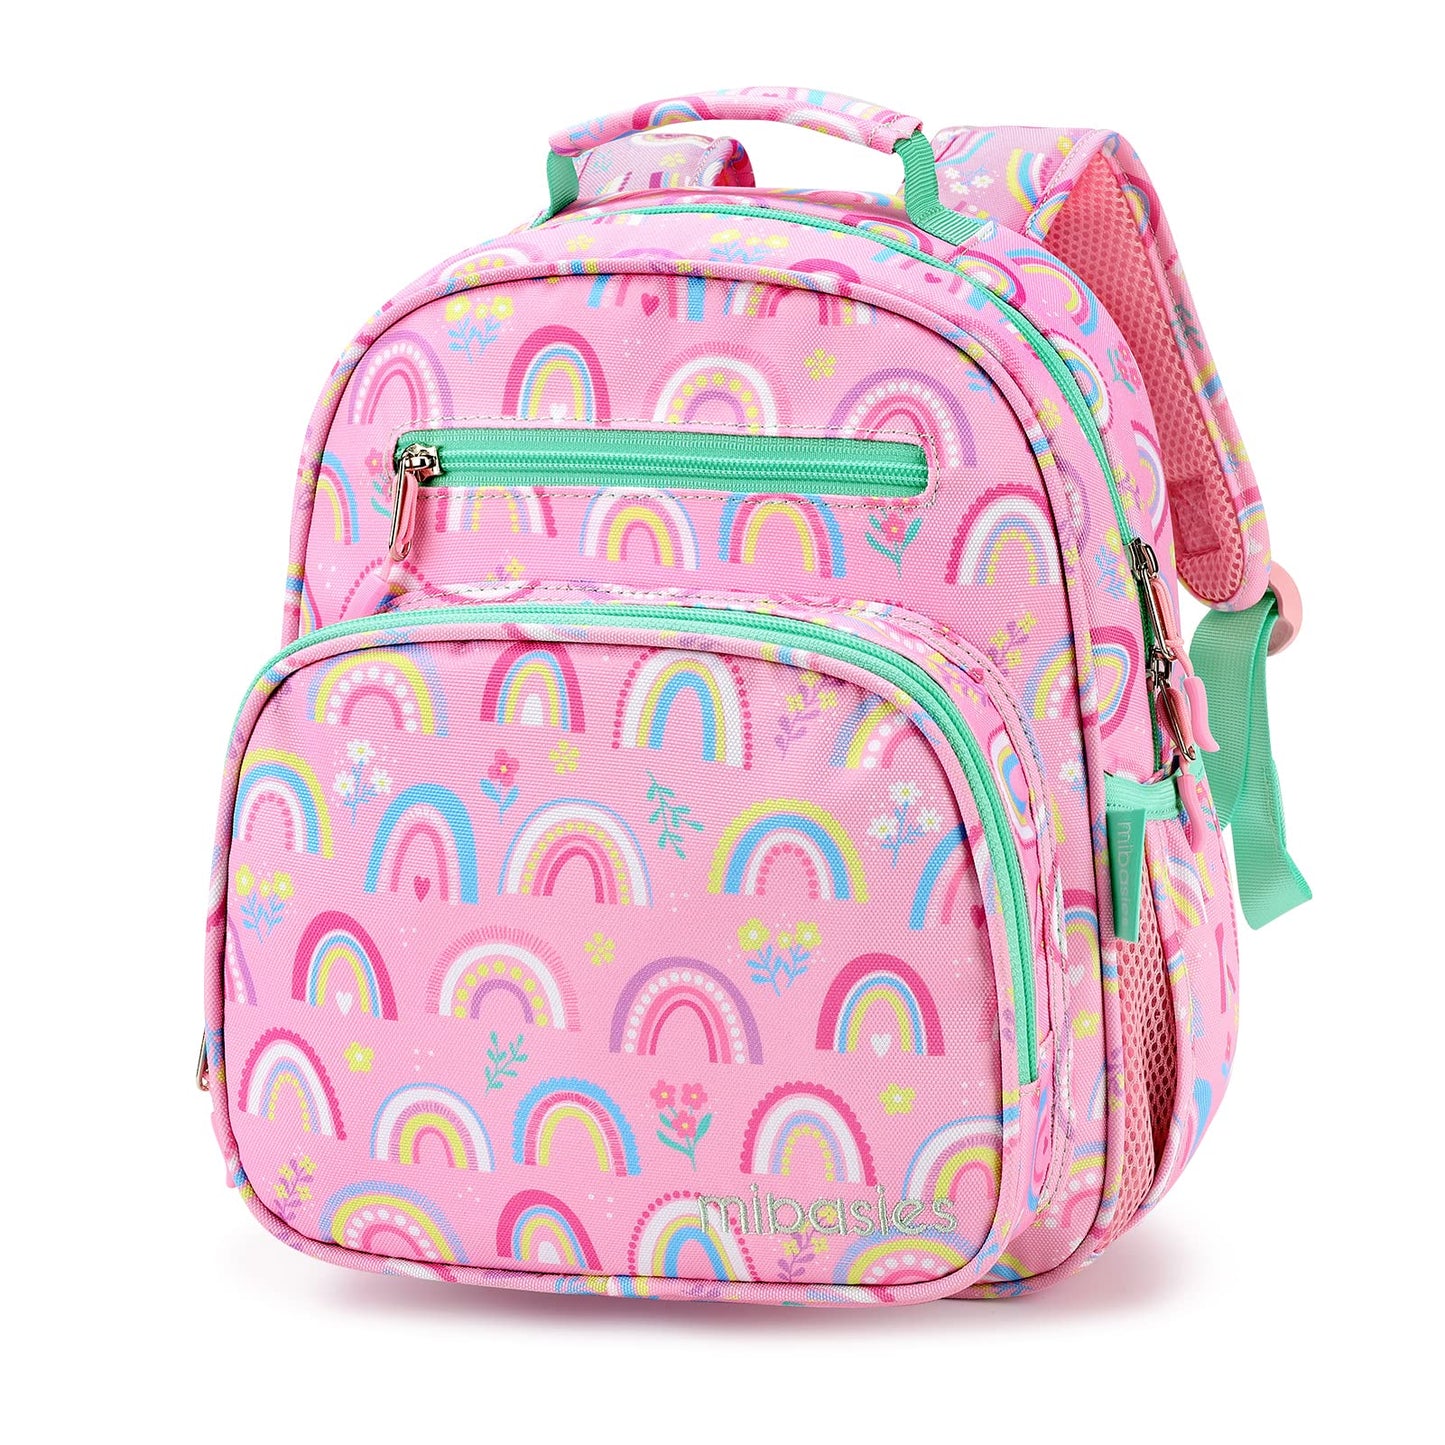 FUN FOR SPRING Kids Backpack